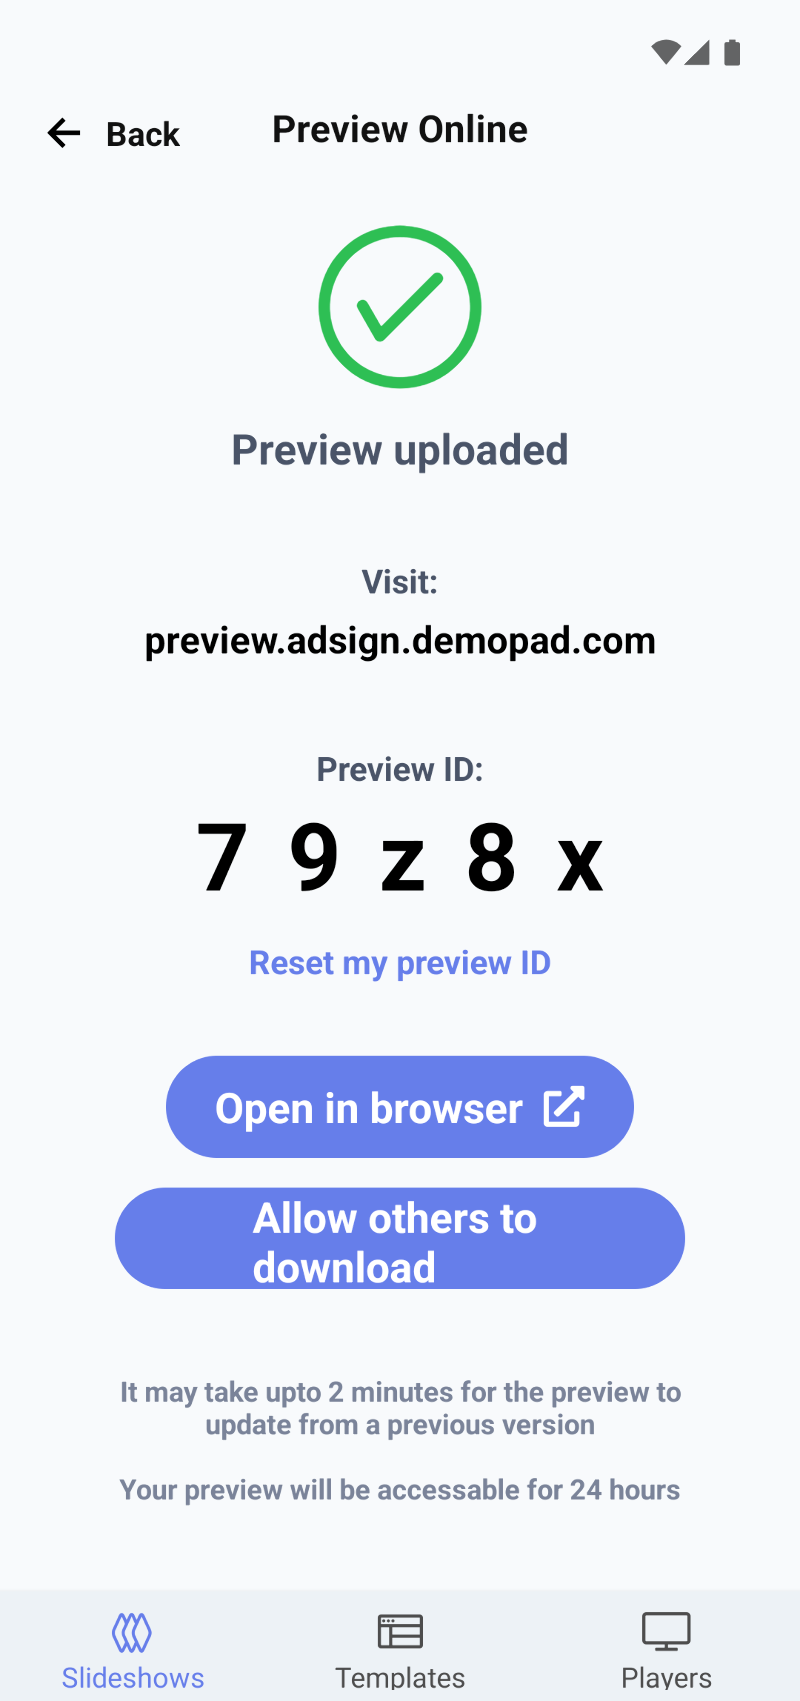 Smartphone app screenshot showing a page titled "Preview Online", showing a 5-digit code and a webpage link